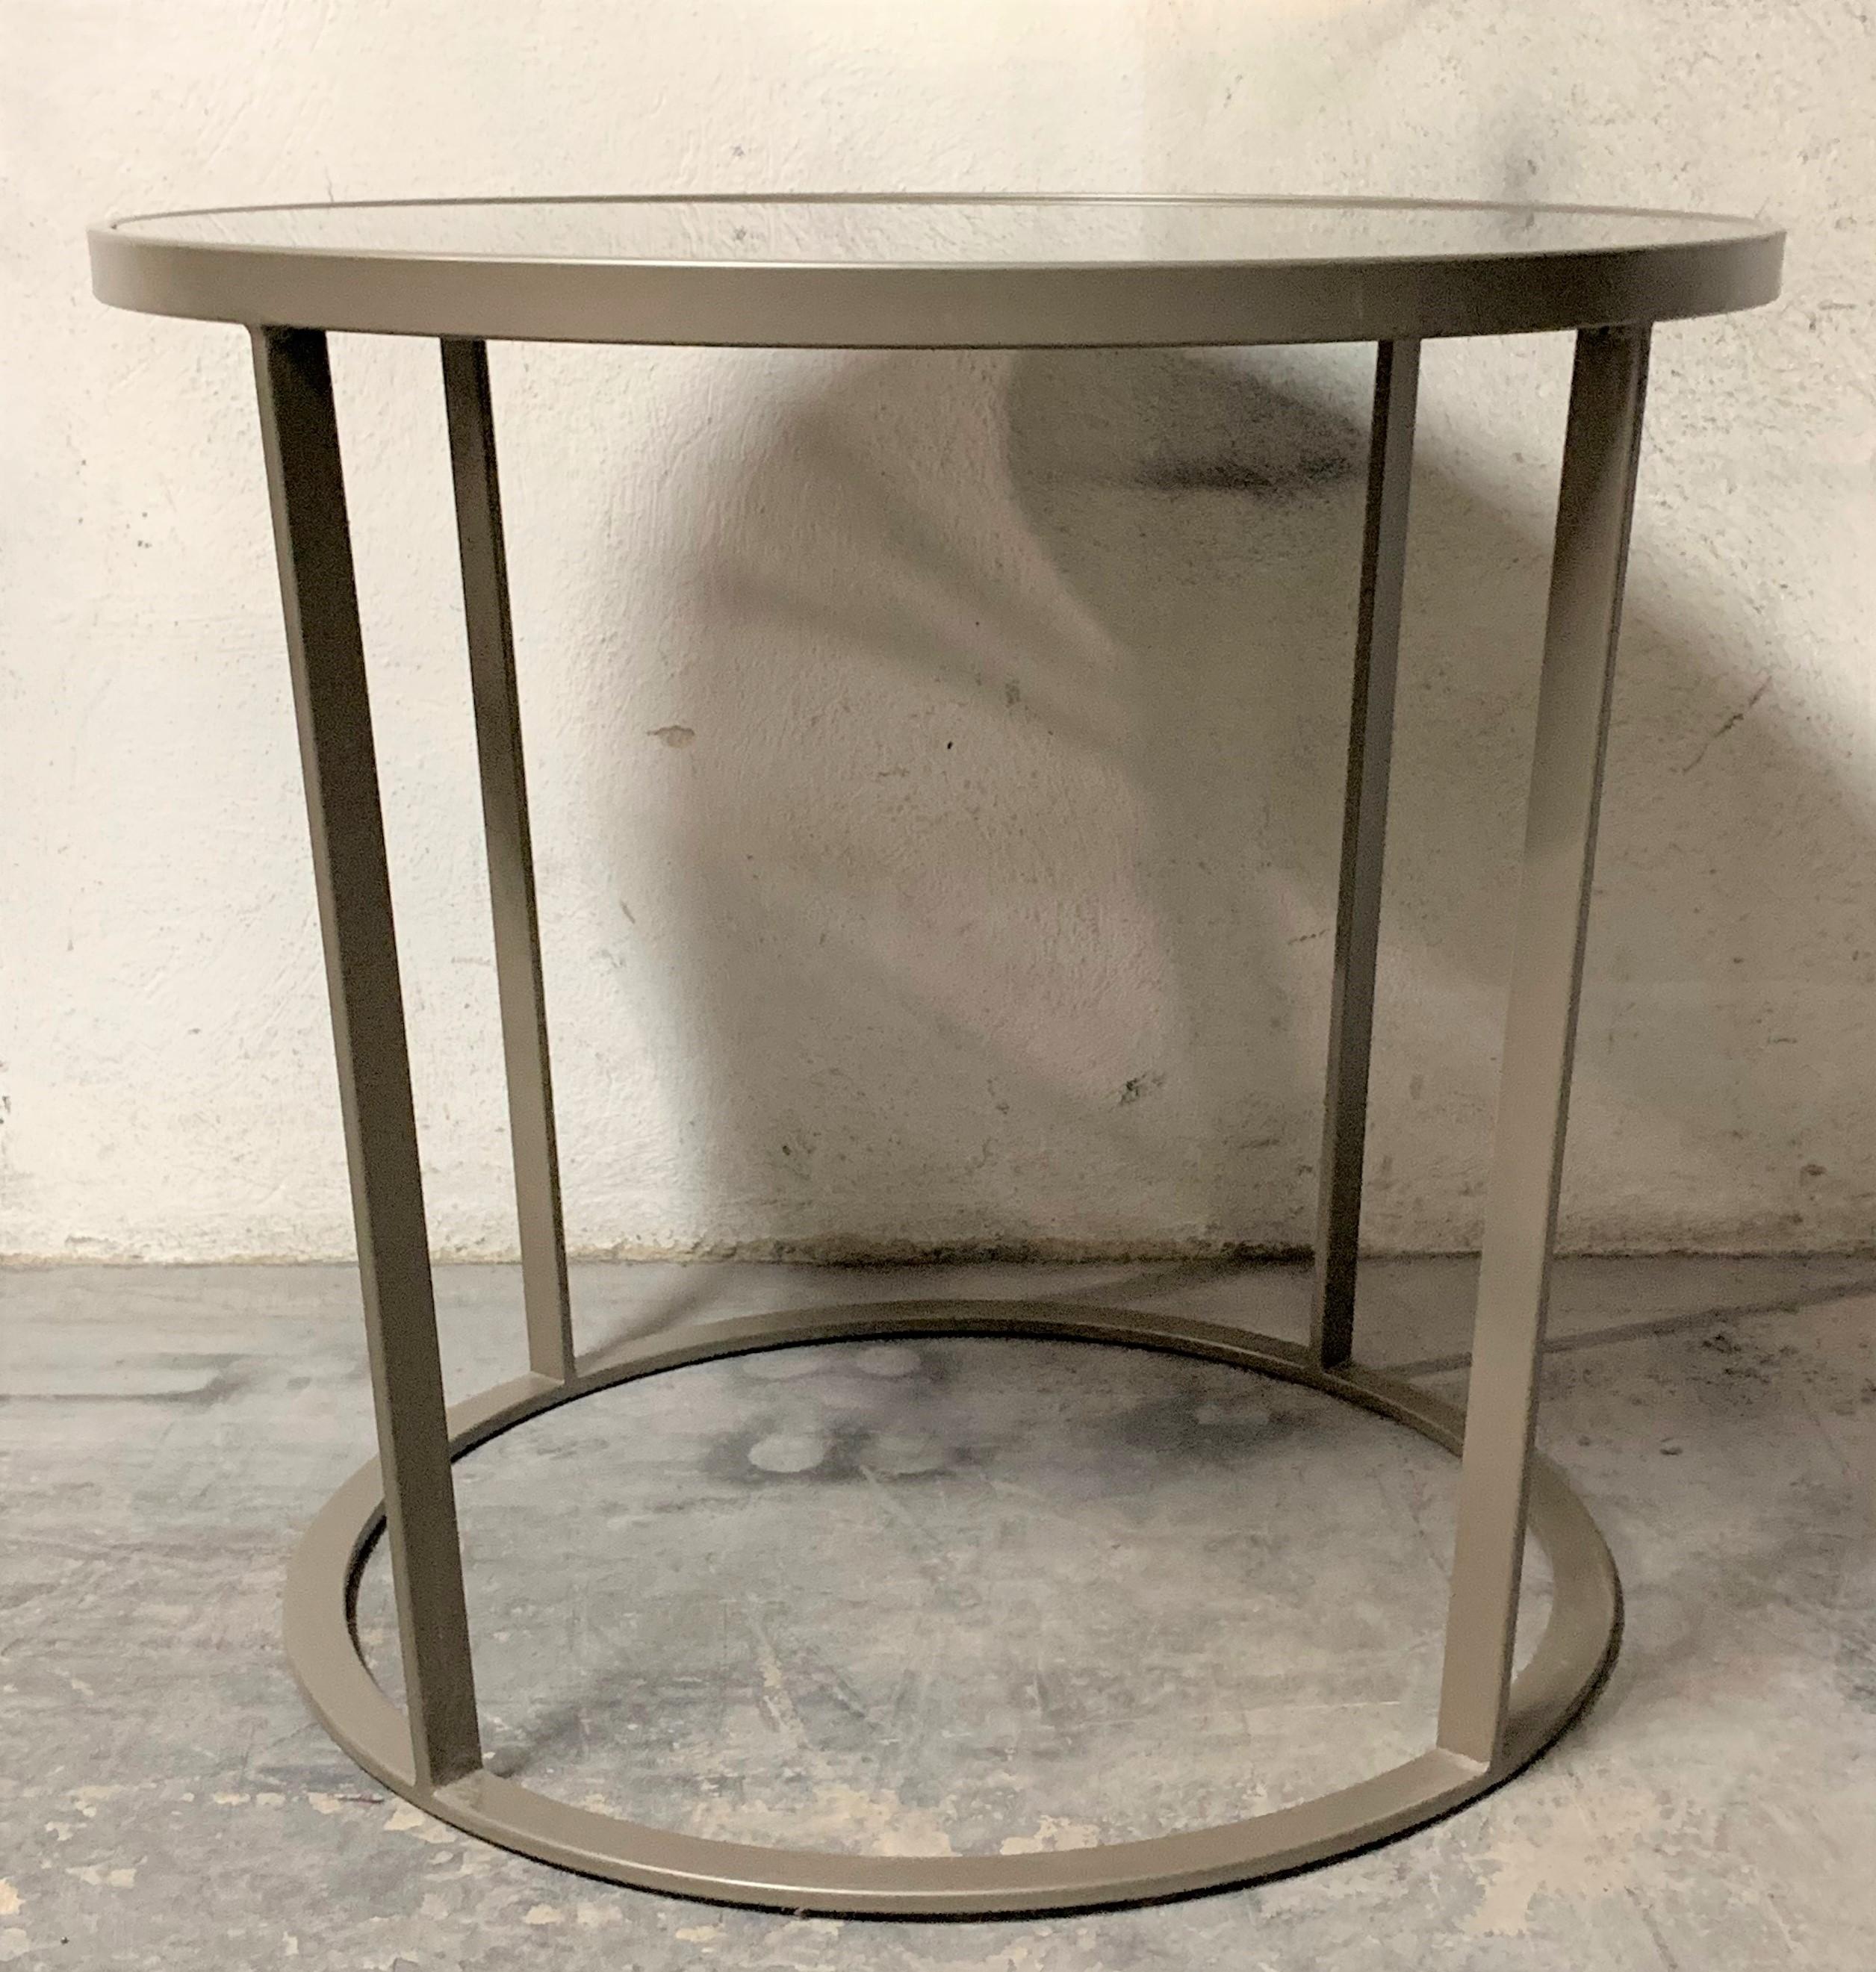 New coffee or side table in champagne color with smoked mirrored glass top.